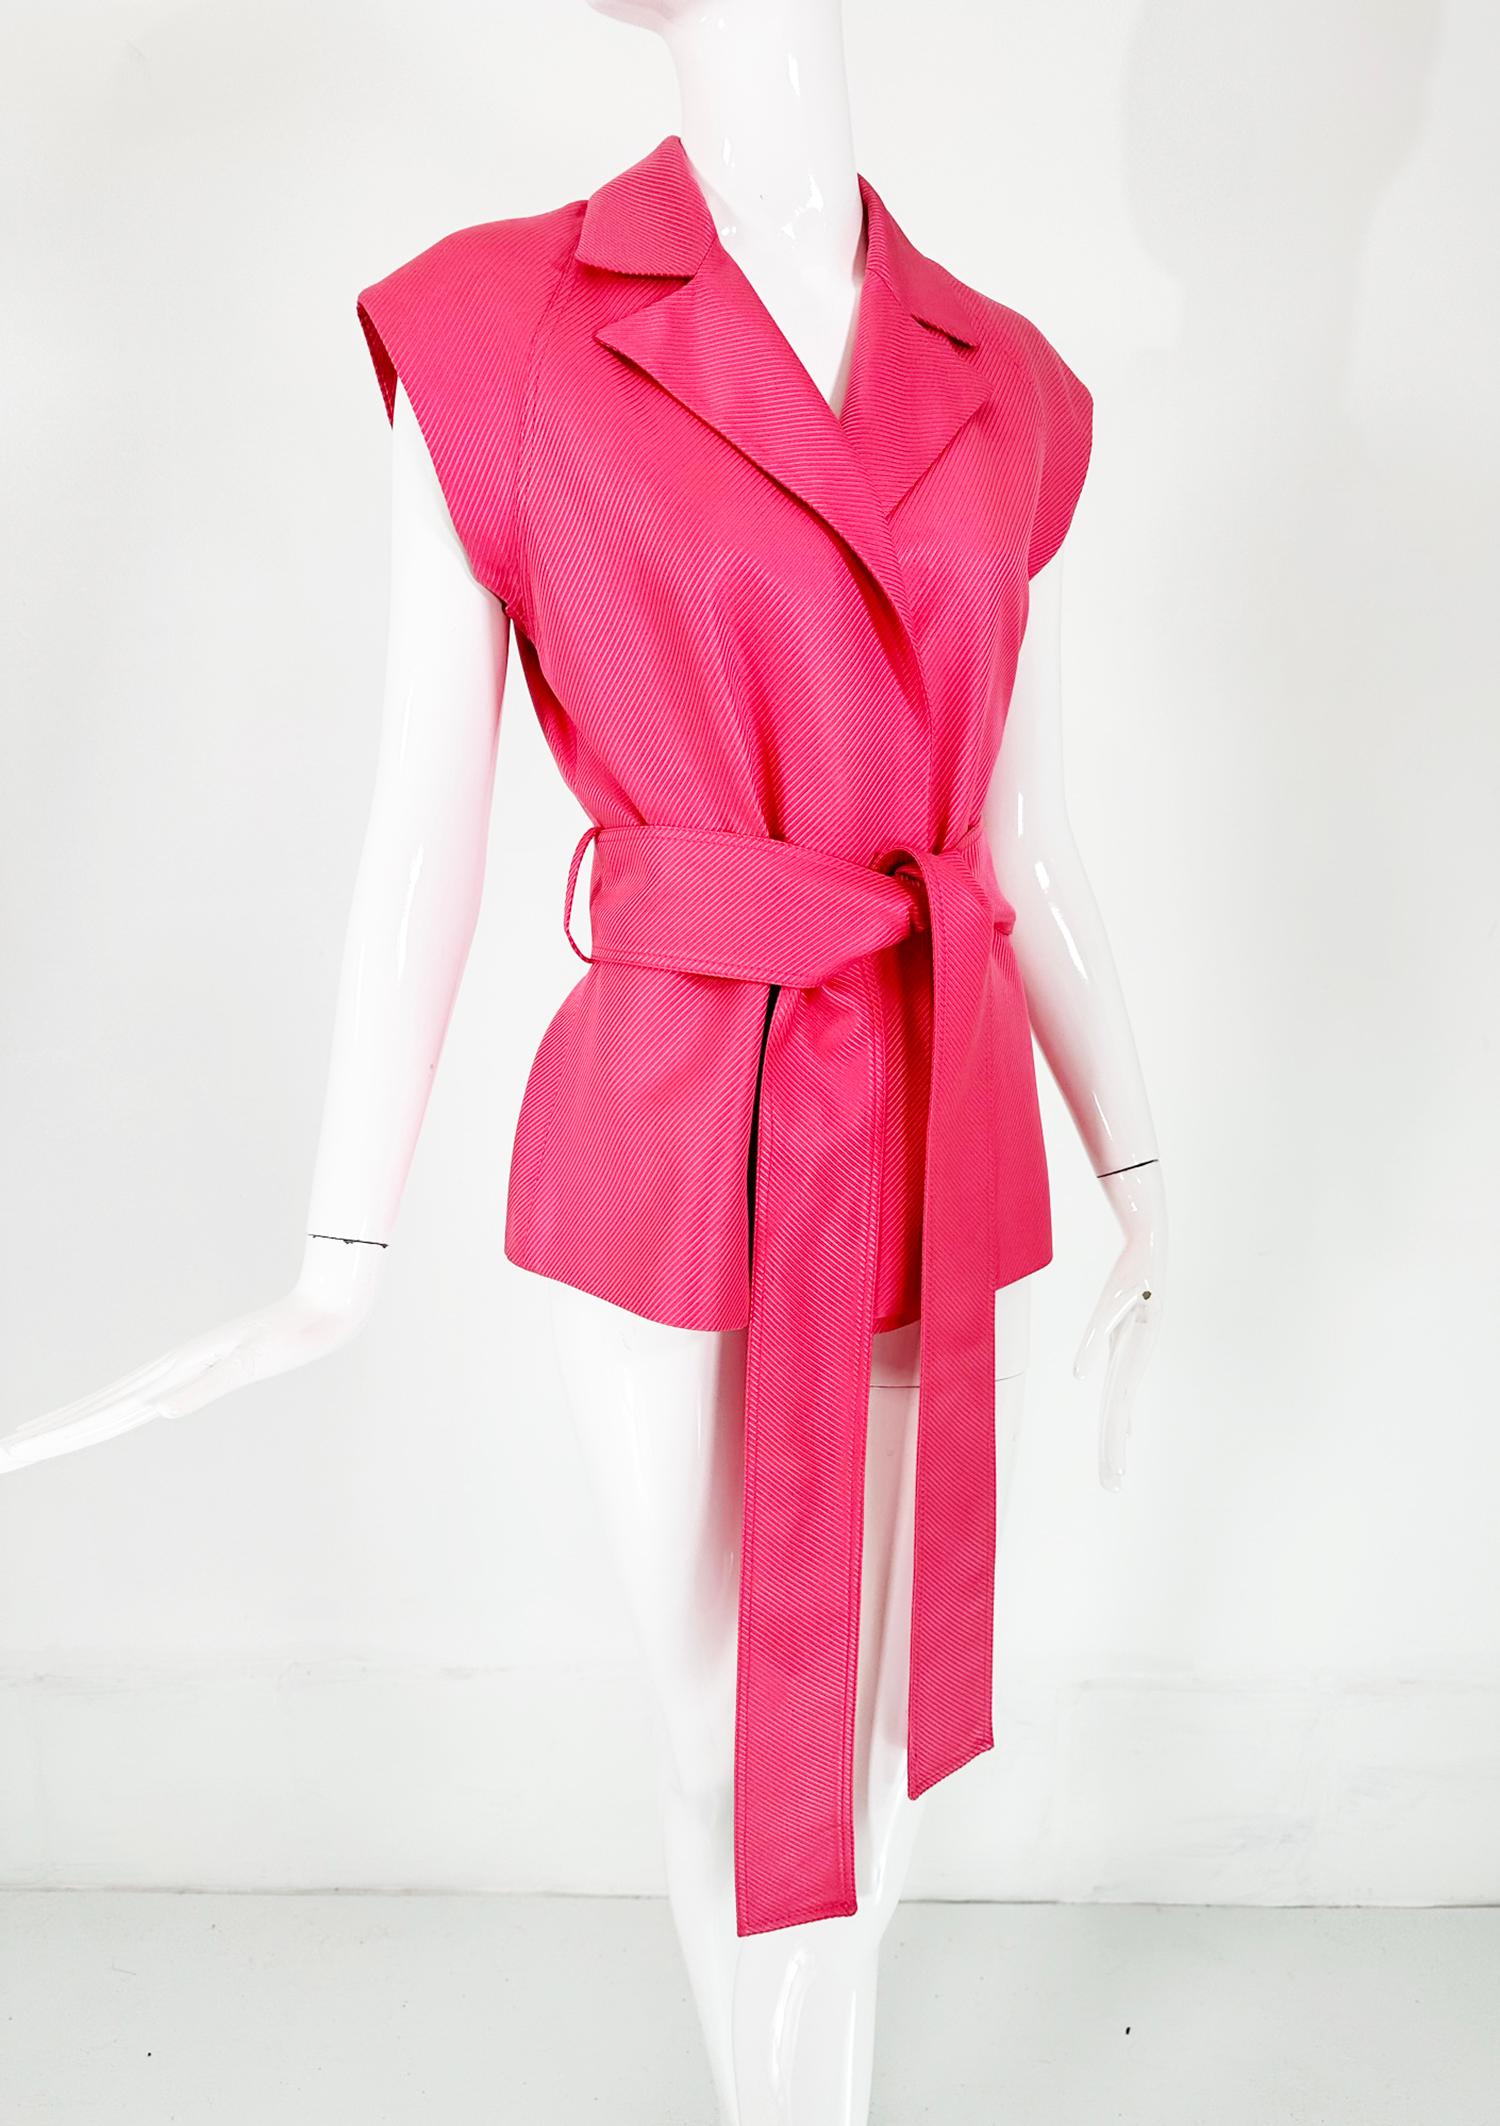 Gianni Versace Couture salmon pink silk twill cap sleeve, belted wrap jacket  42.  This beautiful jacket is the perfect go with piece & could work in any season. A beautiful shade of pink, the fabric is amazing. Cap sleeve jacket has a collar with